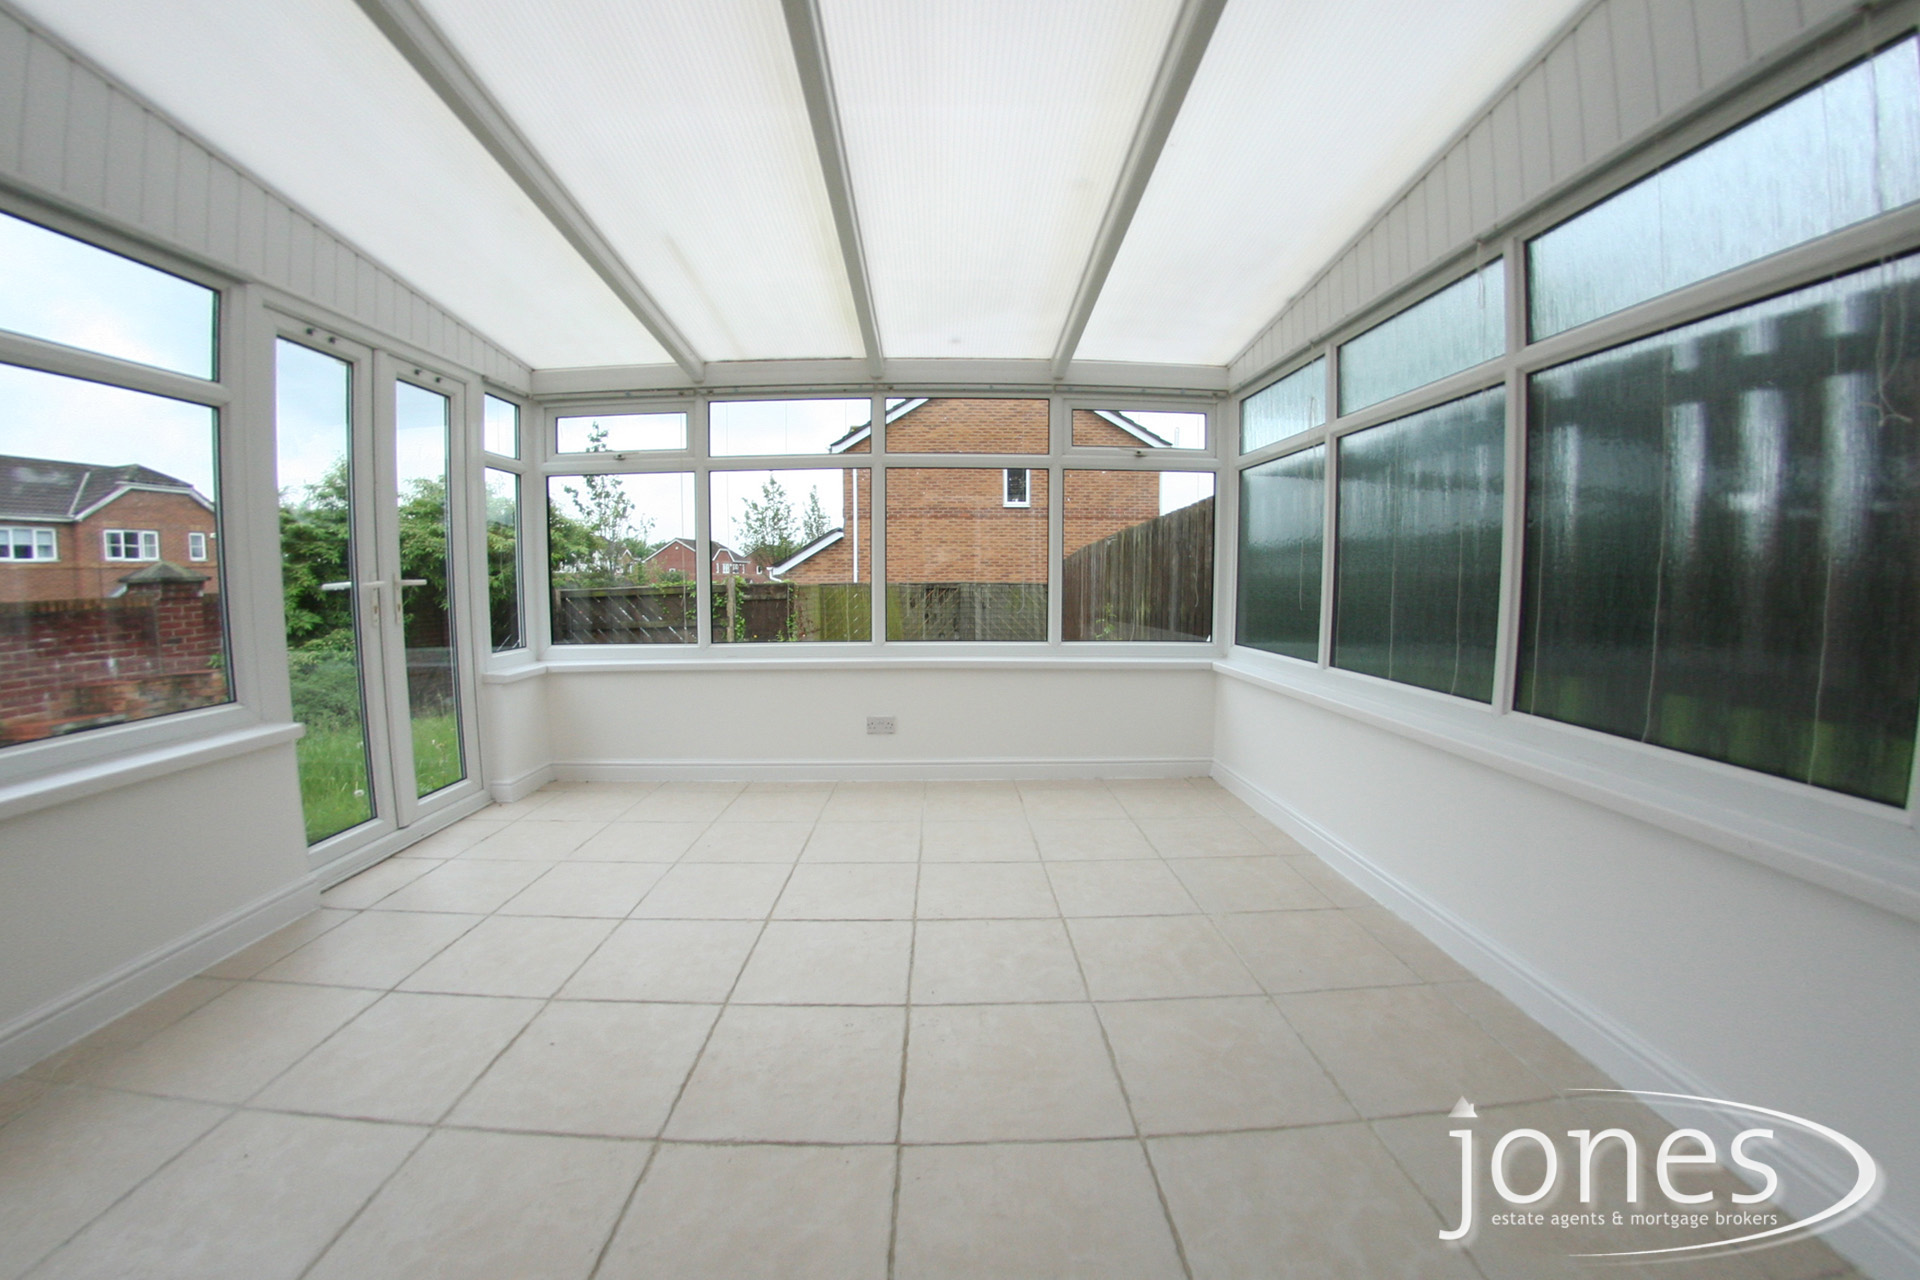 Home for Sale Let - Photo 05 Honeycomb Avenue, Stockton on Tees, TS19 0FF